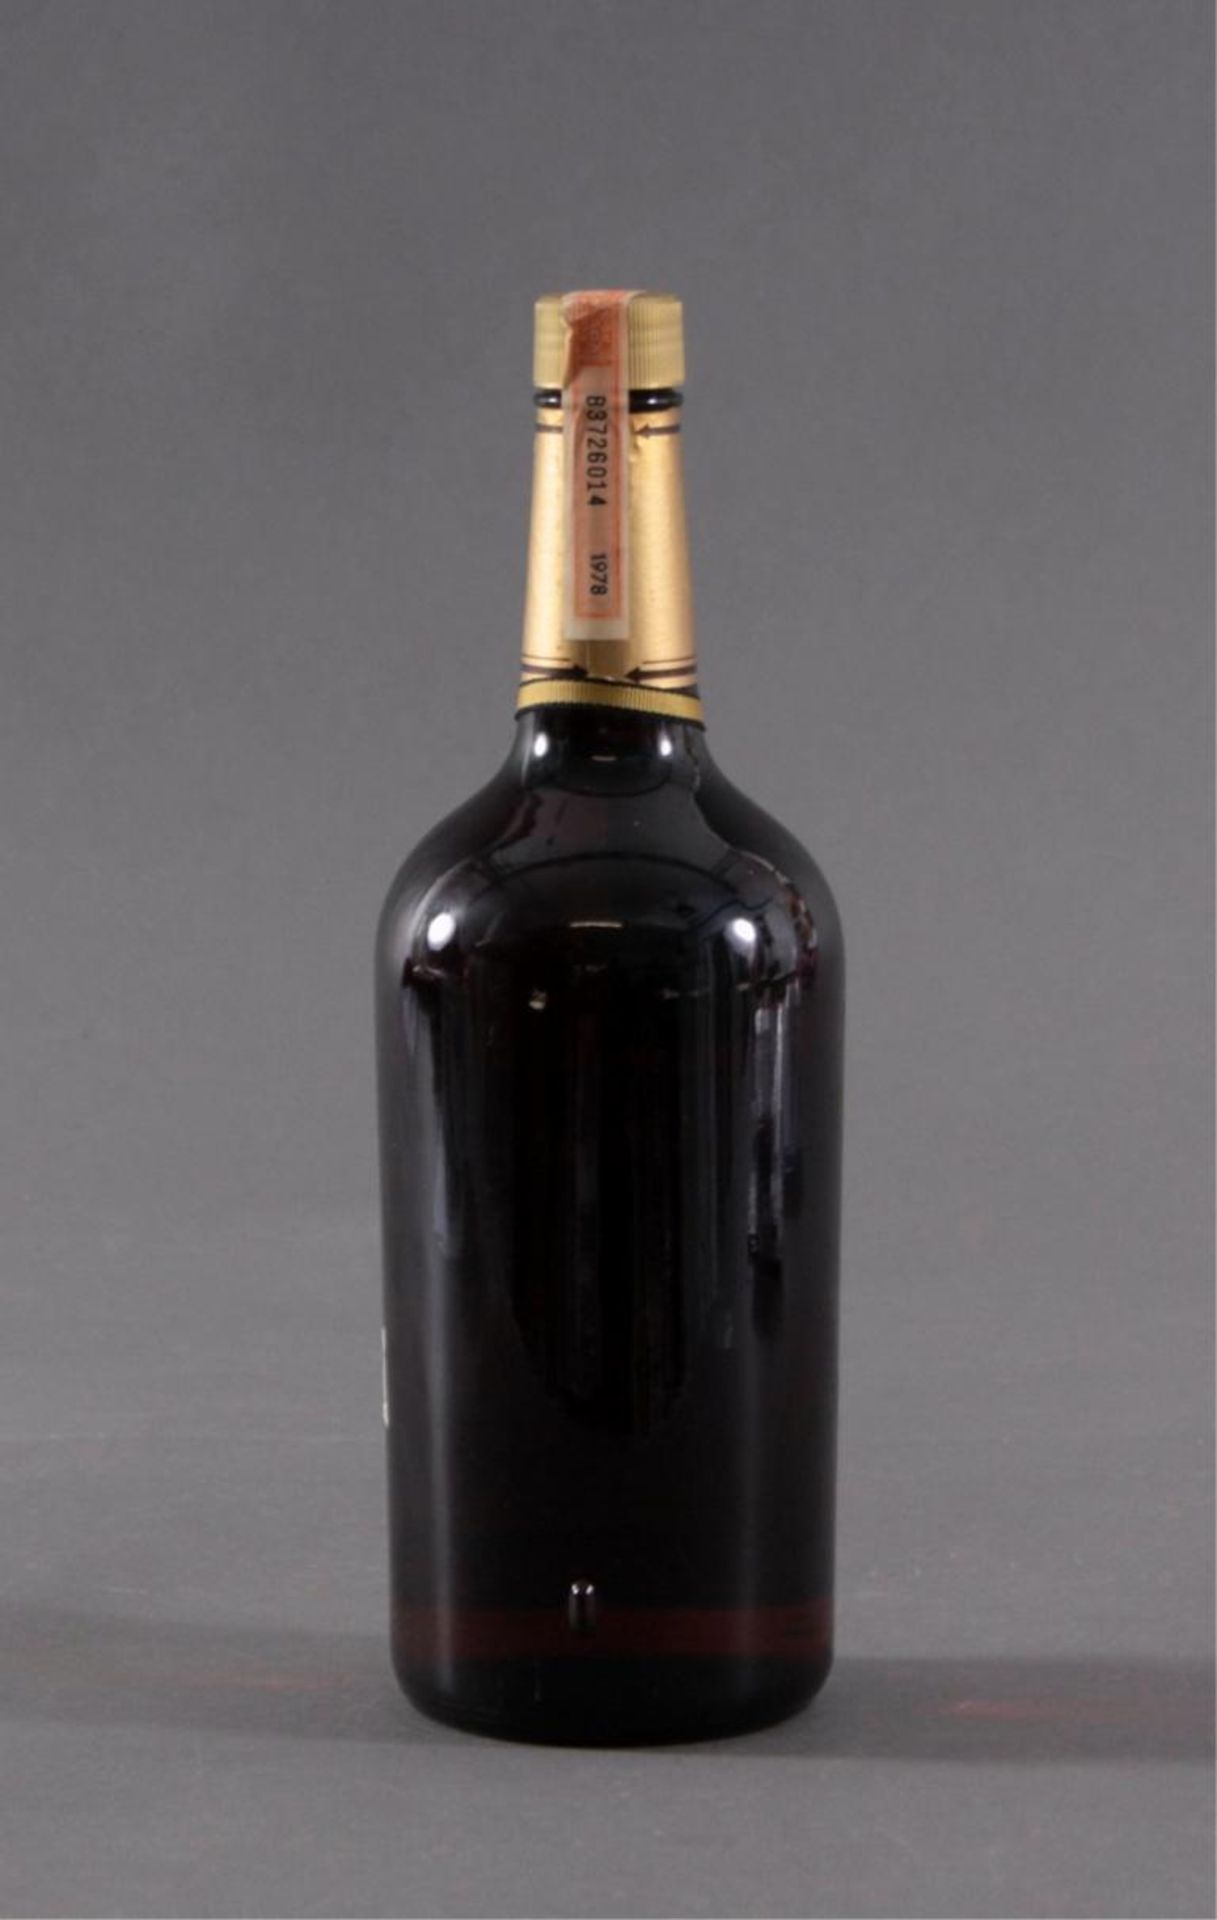 Seagram's V.O. Canadian Whisky, 1978Joseph E. Seagram & Sons. Limited, 1,14 Liter Flasche - Image 2 of 2